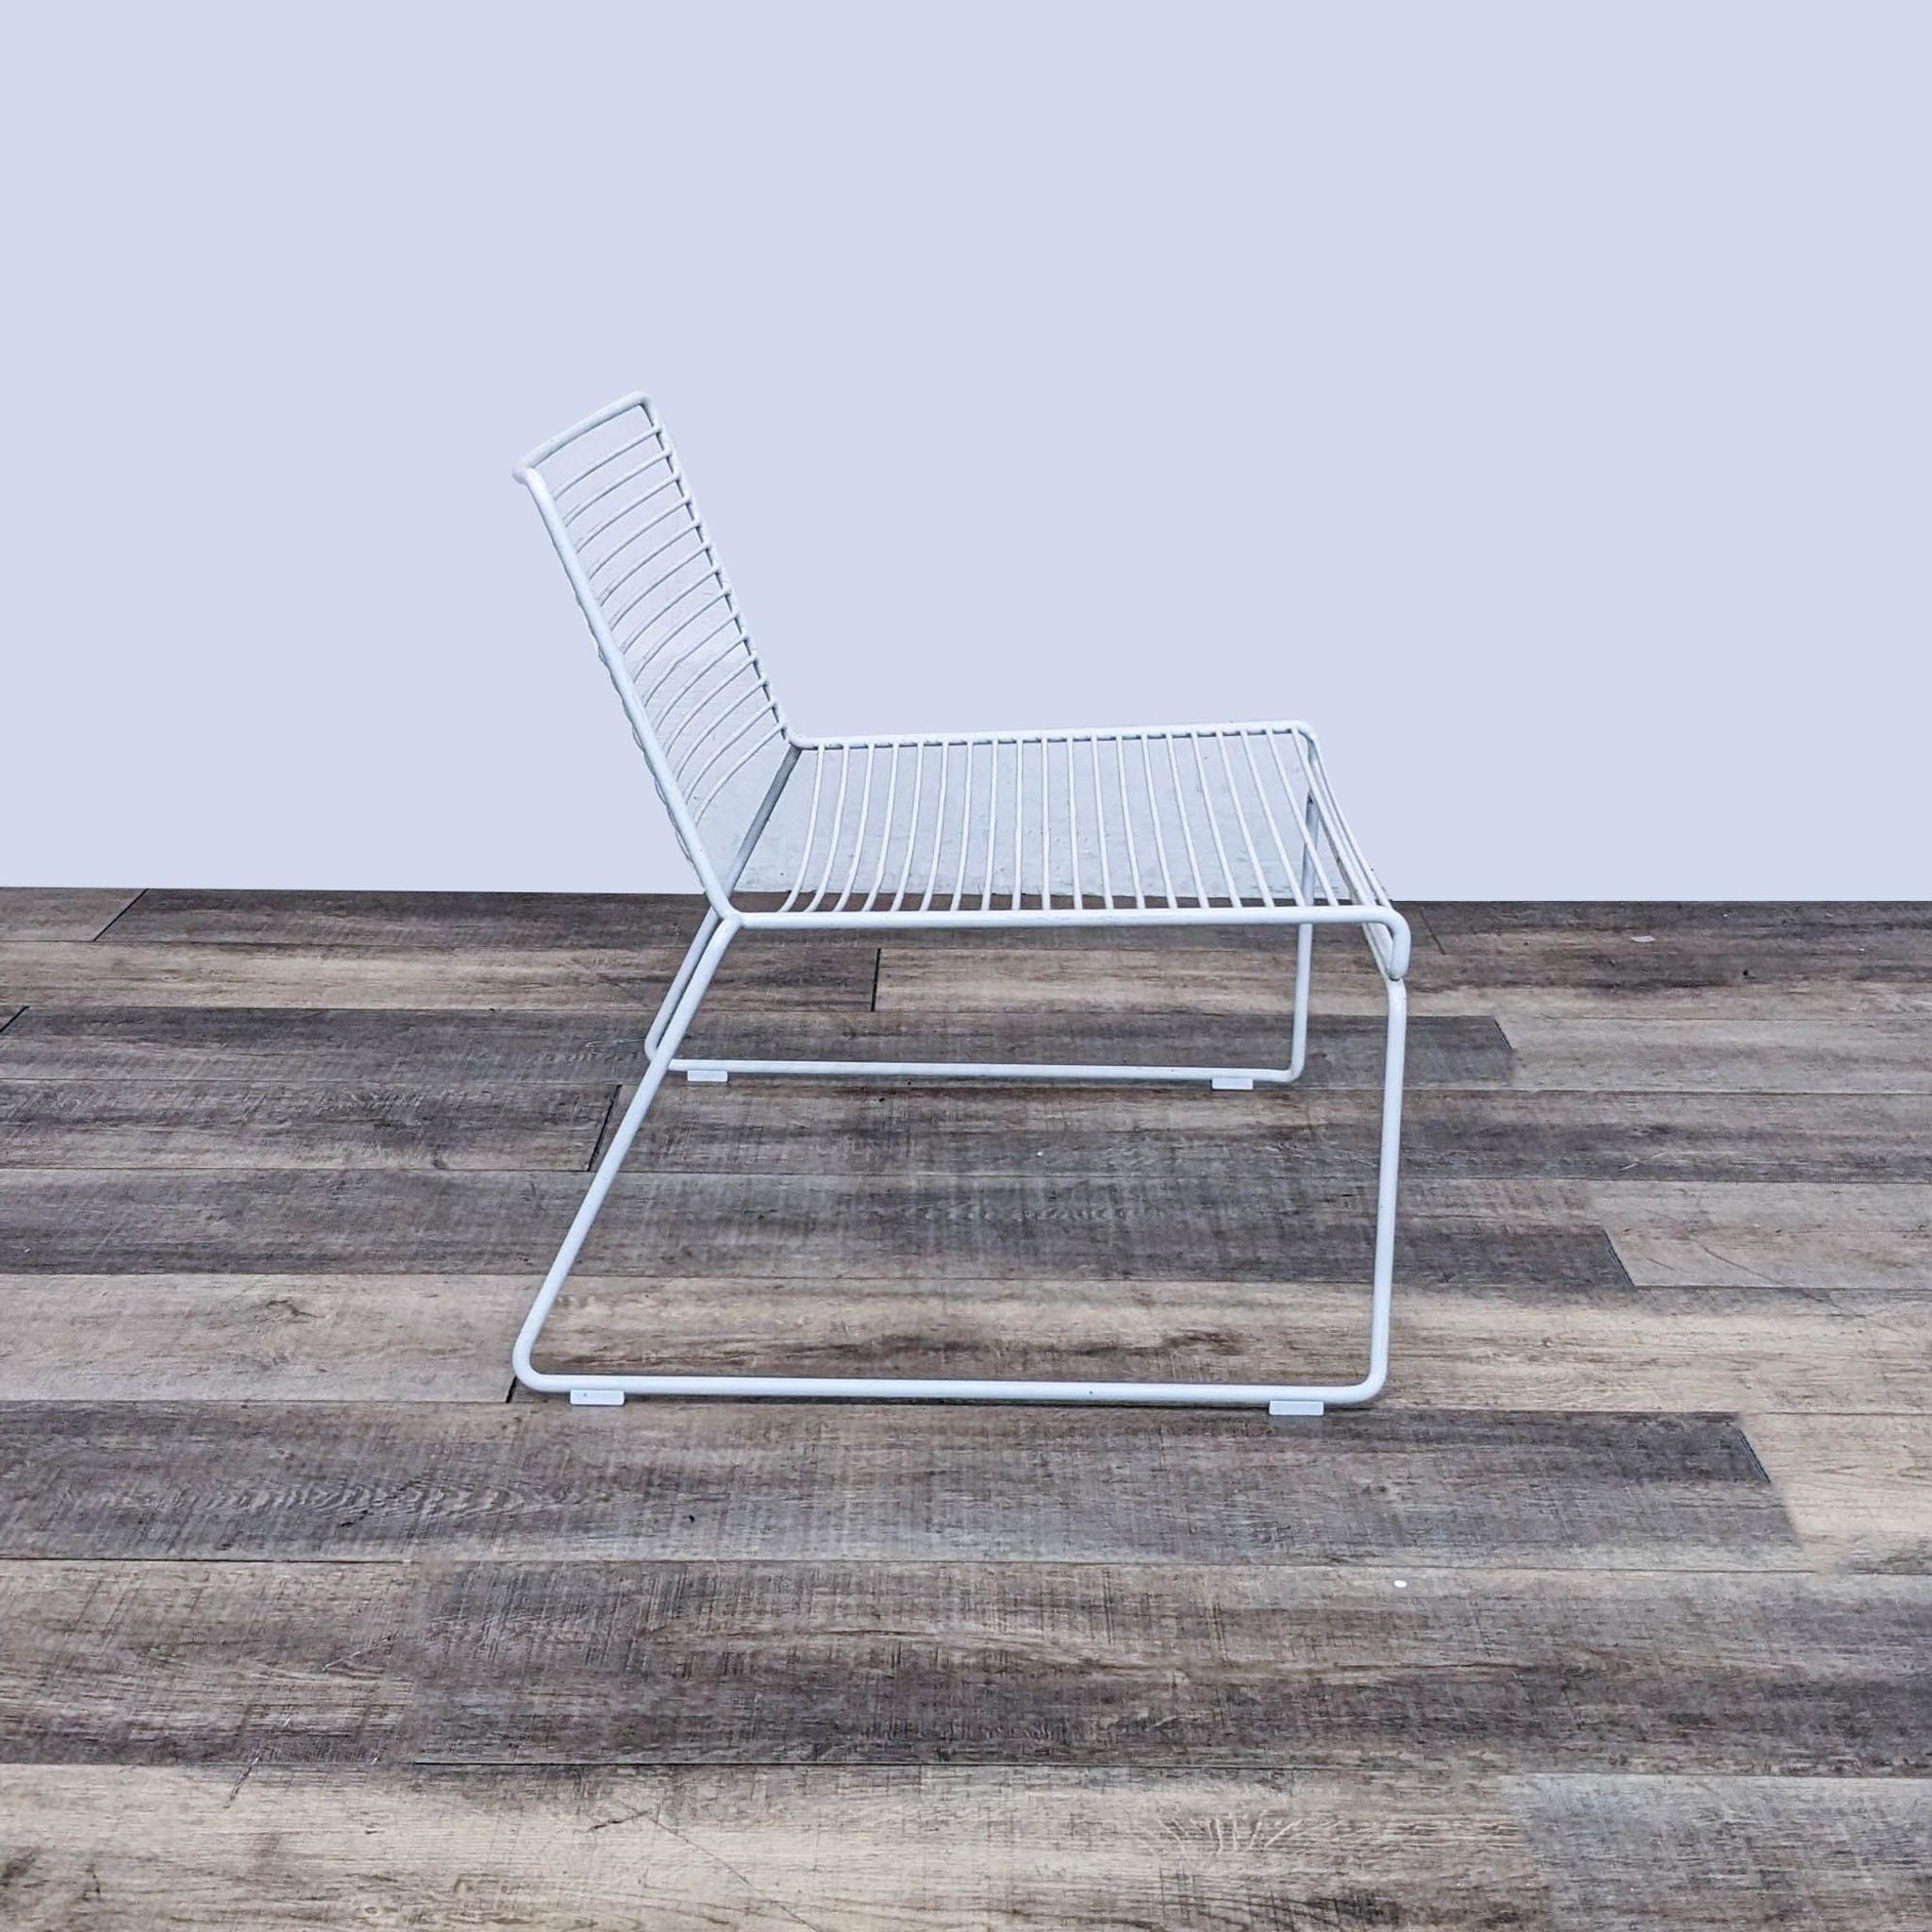 Design Within Reach's Hee lounge chair with a white powder-coated steel frame on a wooden floor.